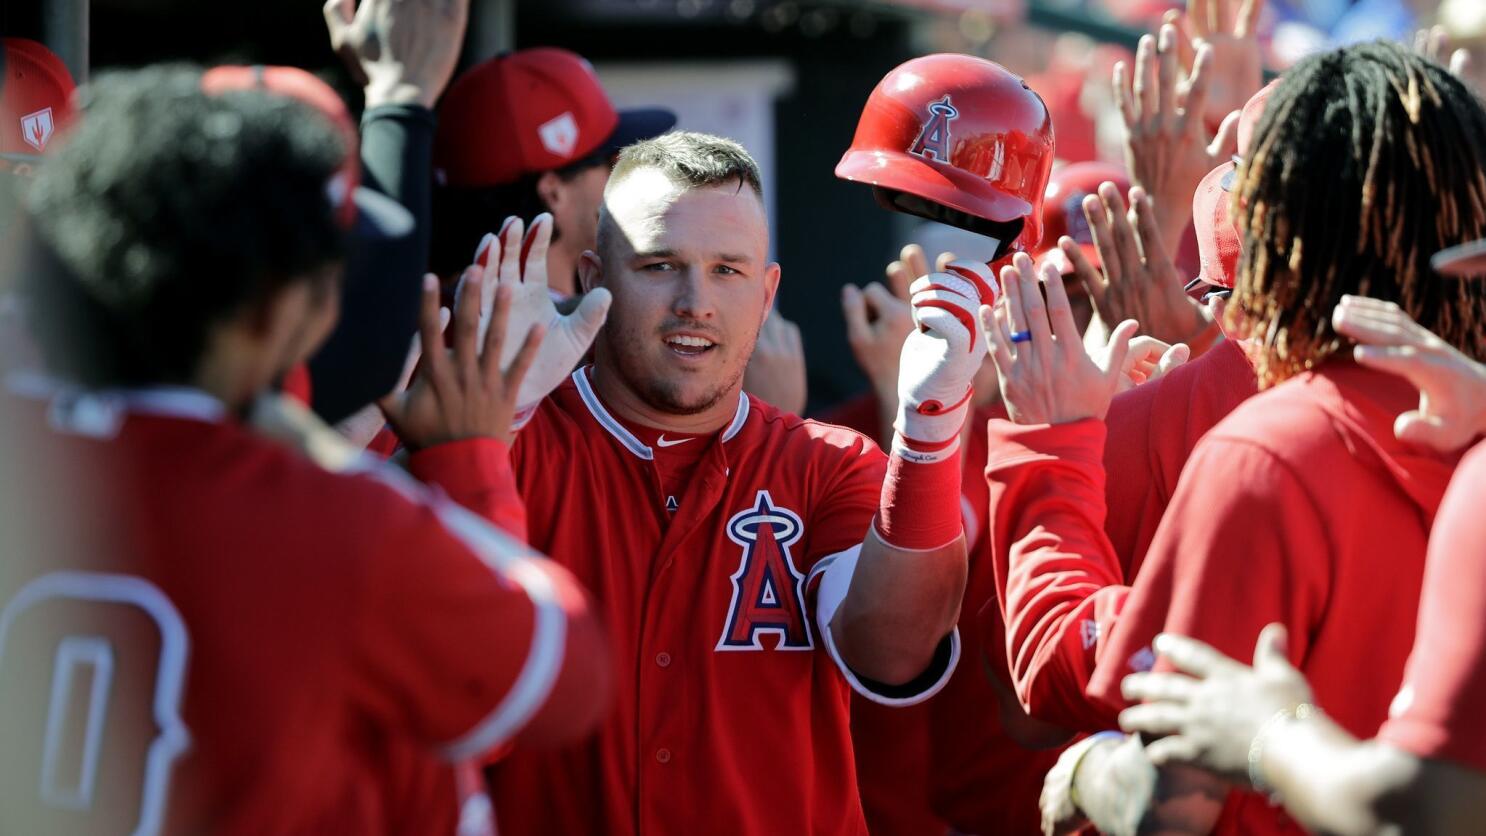 How Mike Trout became the centerpiece of the Angels' epic 2009